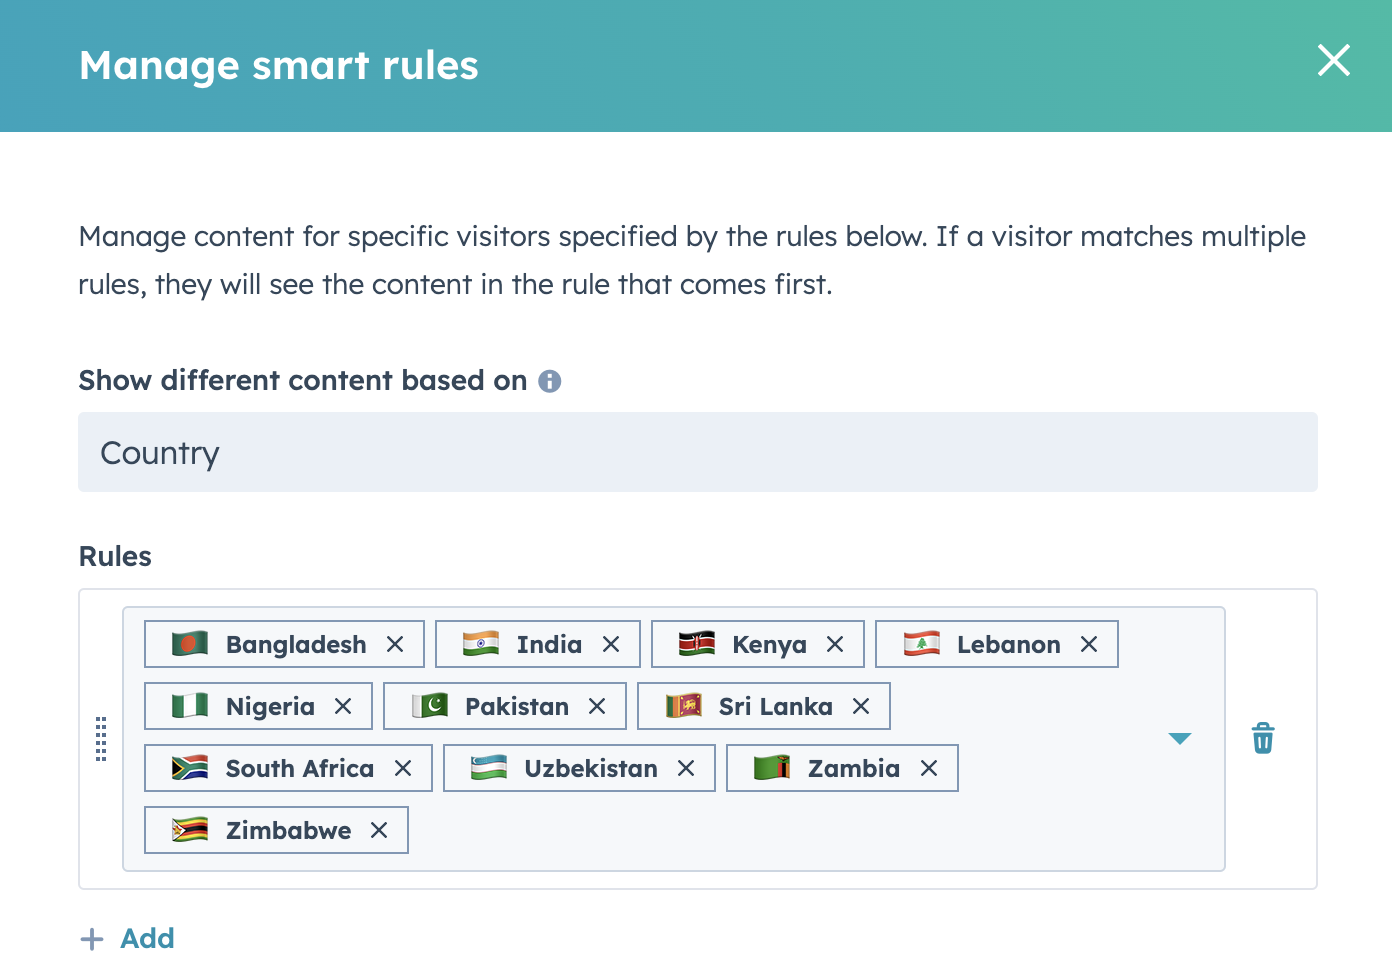 Managing content for specific visitors based on country